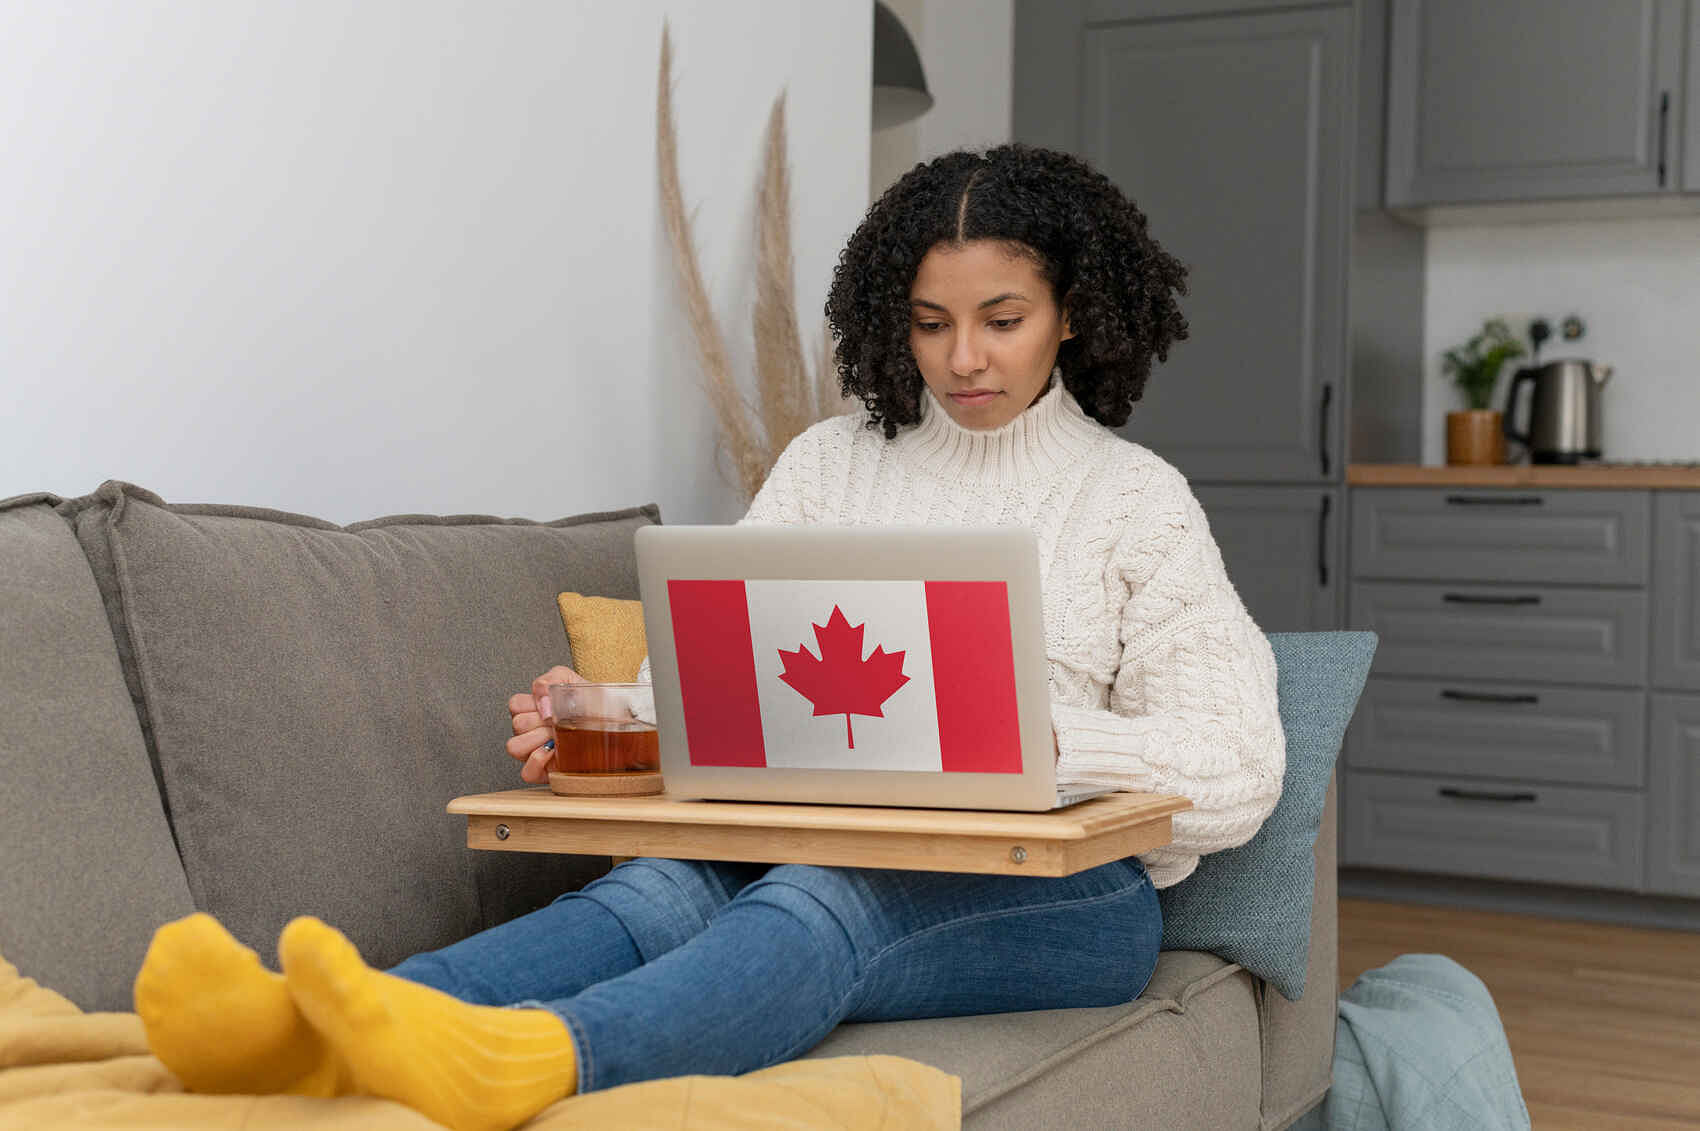 A woman sitting on a couch, working on a laptop adorned with a Canadian flag sticker